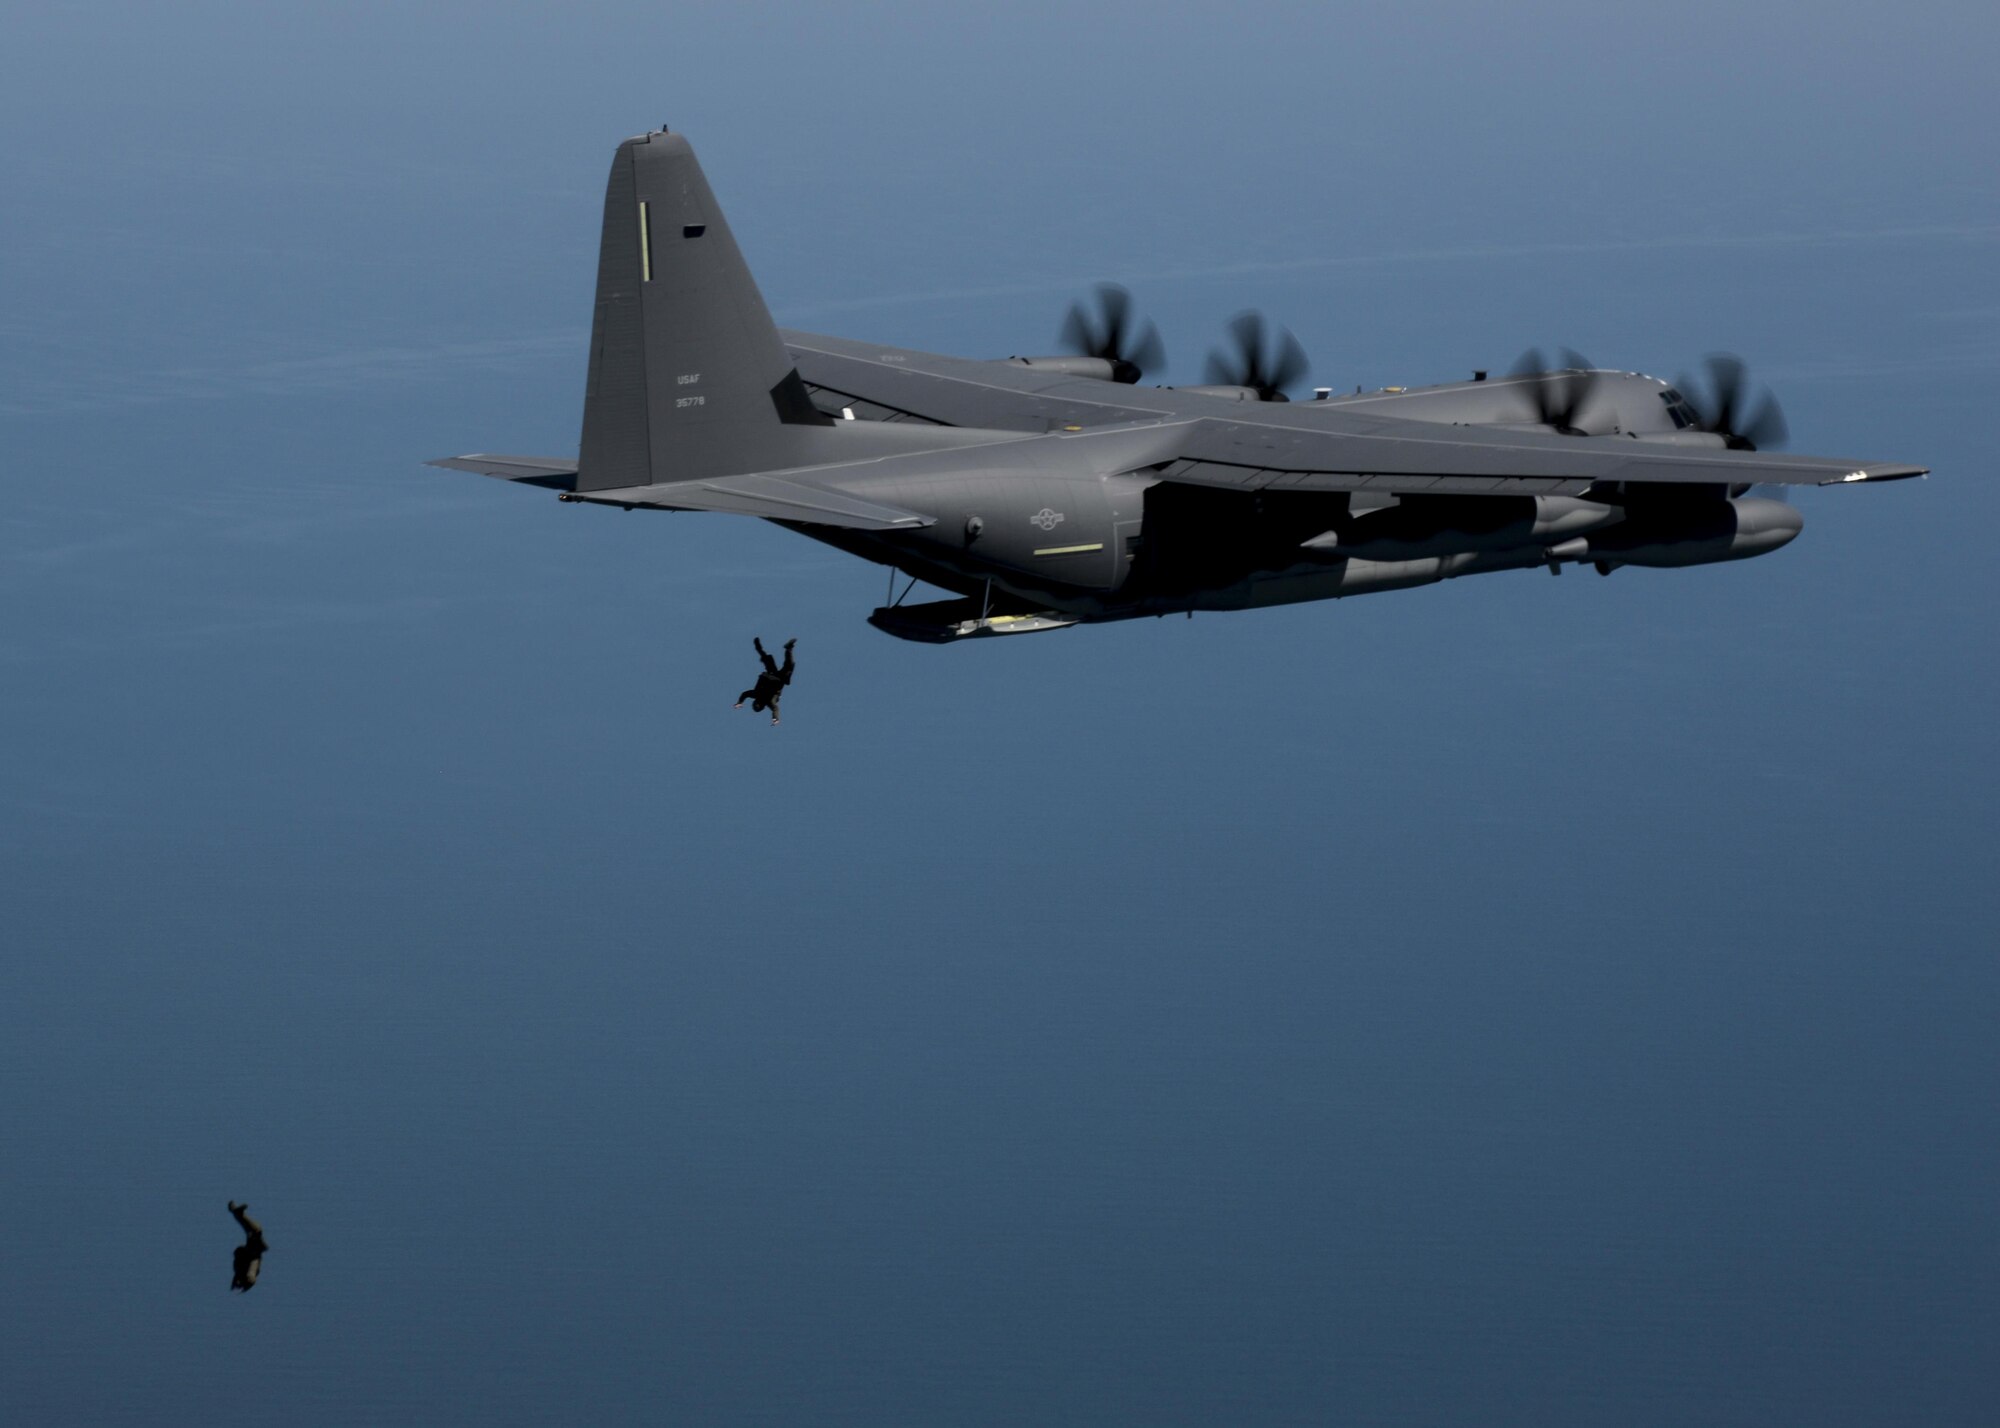 Members of the U.S. Navy Special Warfare Combatant-Craft unit perform high-altitude, low-opening parachute jumps from the back of a U.S. Air Force MC-130J Commando II during an exercise April 16, 2016, over the Black Sea. Airmen from RAF Mildenhall, England, worked with the Naval unit to deploy a large Rigid Inflatable boat off the coast of Bulgaria while merging the capabilities of the U.S. Air Force and the U.S. Navy. (U.S. Air Force photo by Senior Airman Victoria H. Taylor/Released)